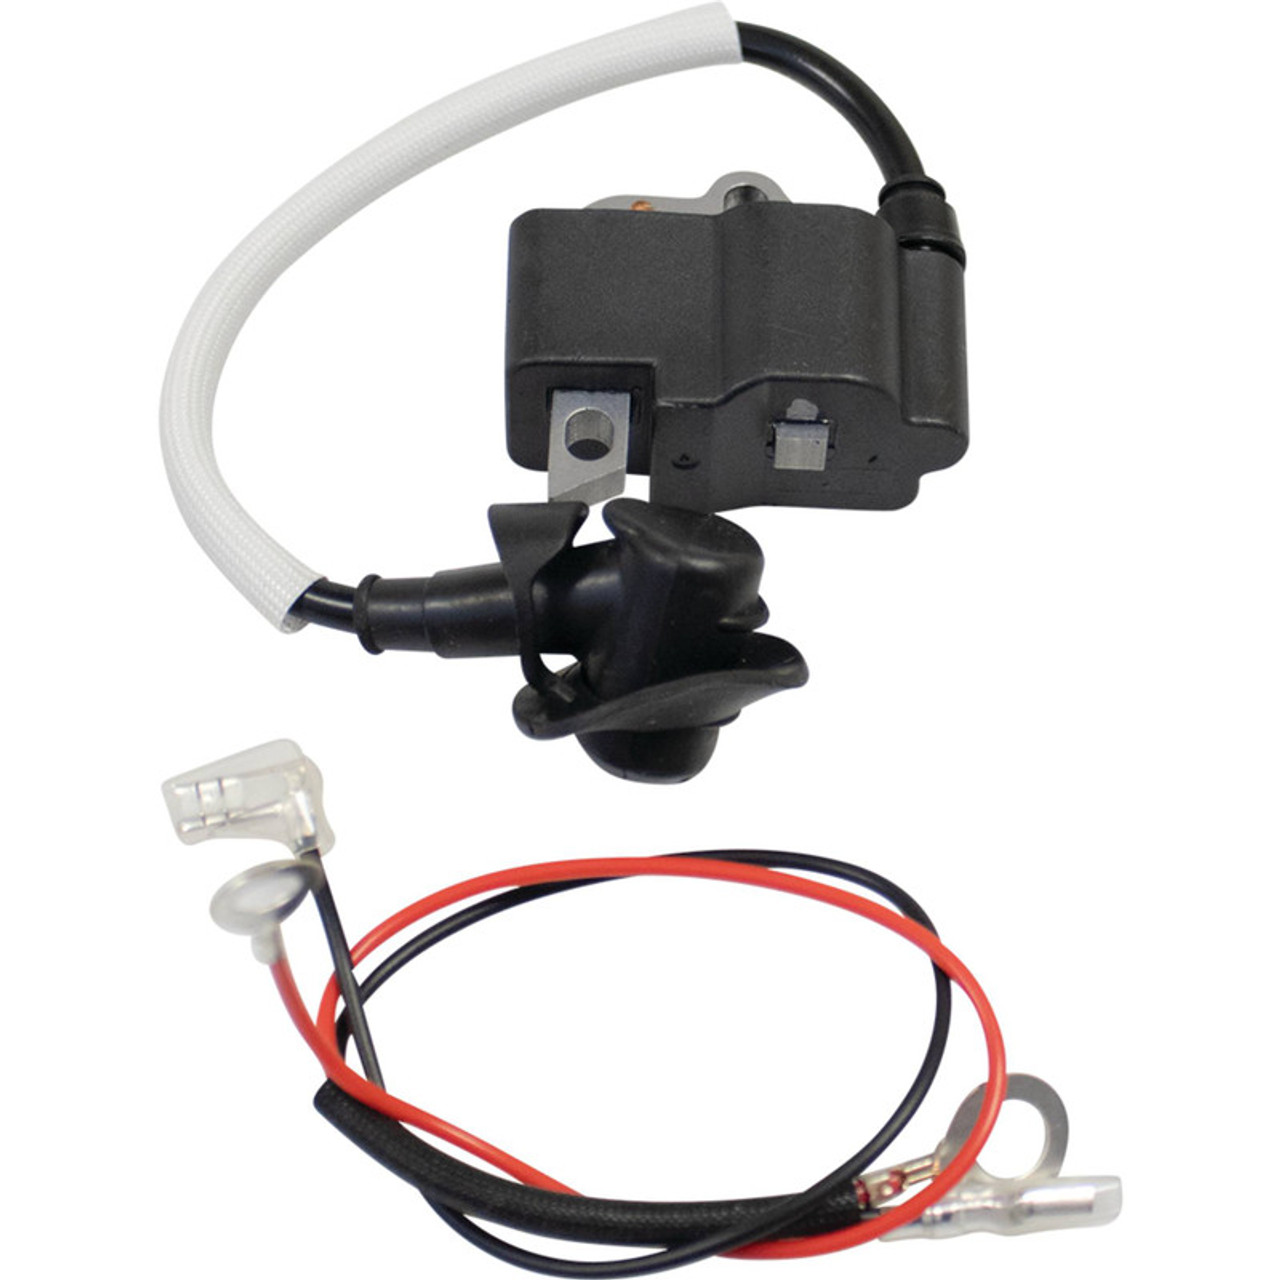 Ignition Coil for Stihl MS361 chainsaw 1135 400 1308, 11354001308